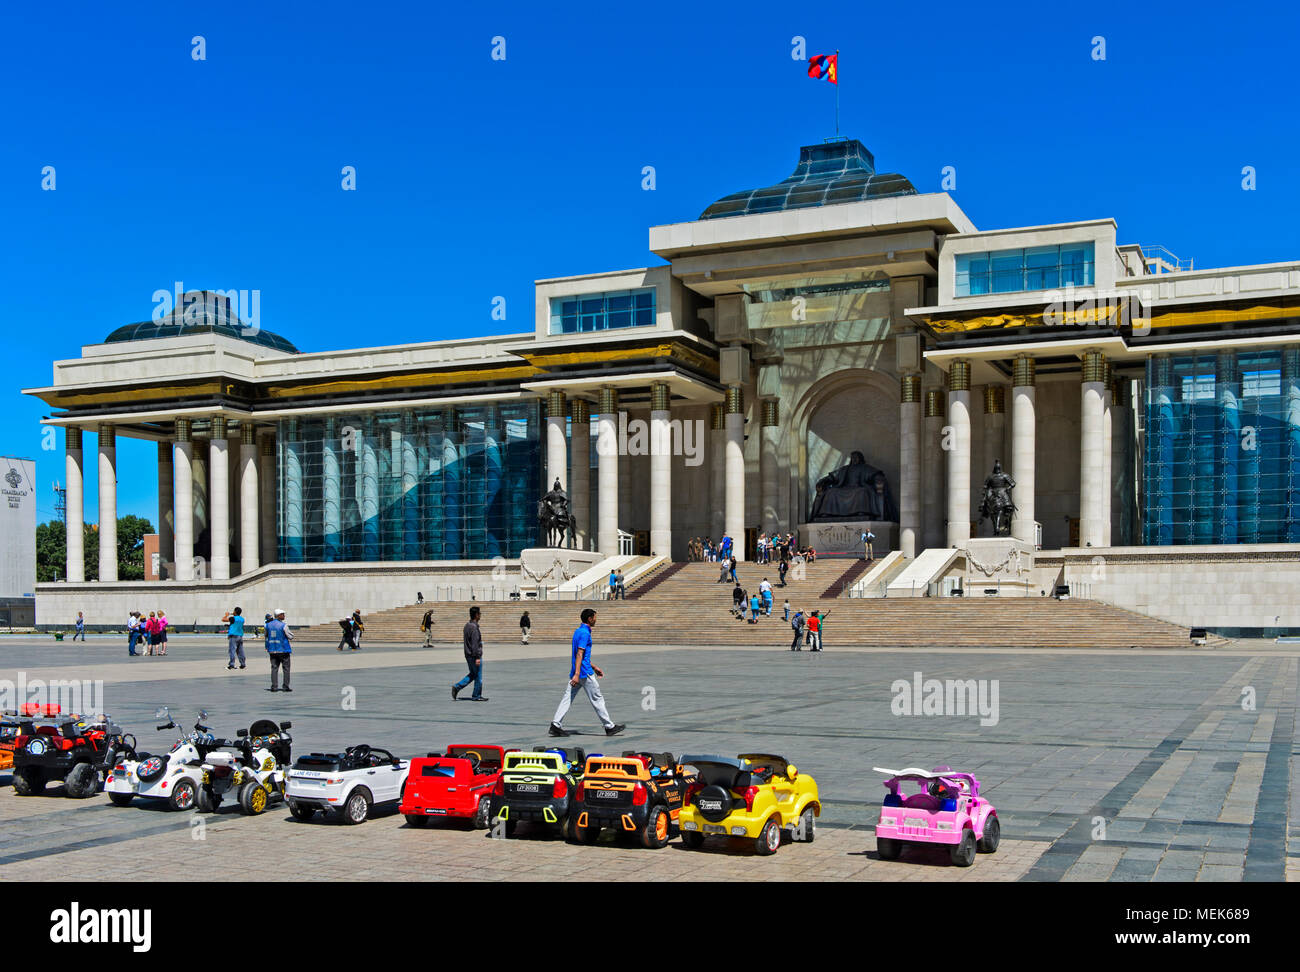 Electric toy cars waiting for kids in front of the Parliament Building, Sükhbaatar Square, Ulaanbaatar, Mongolia Stock Photo